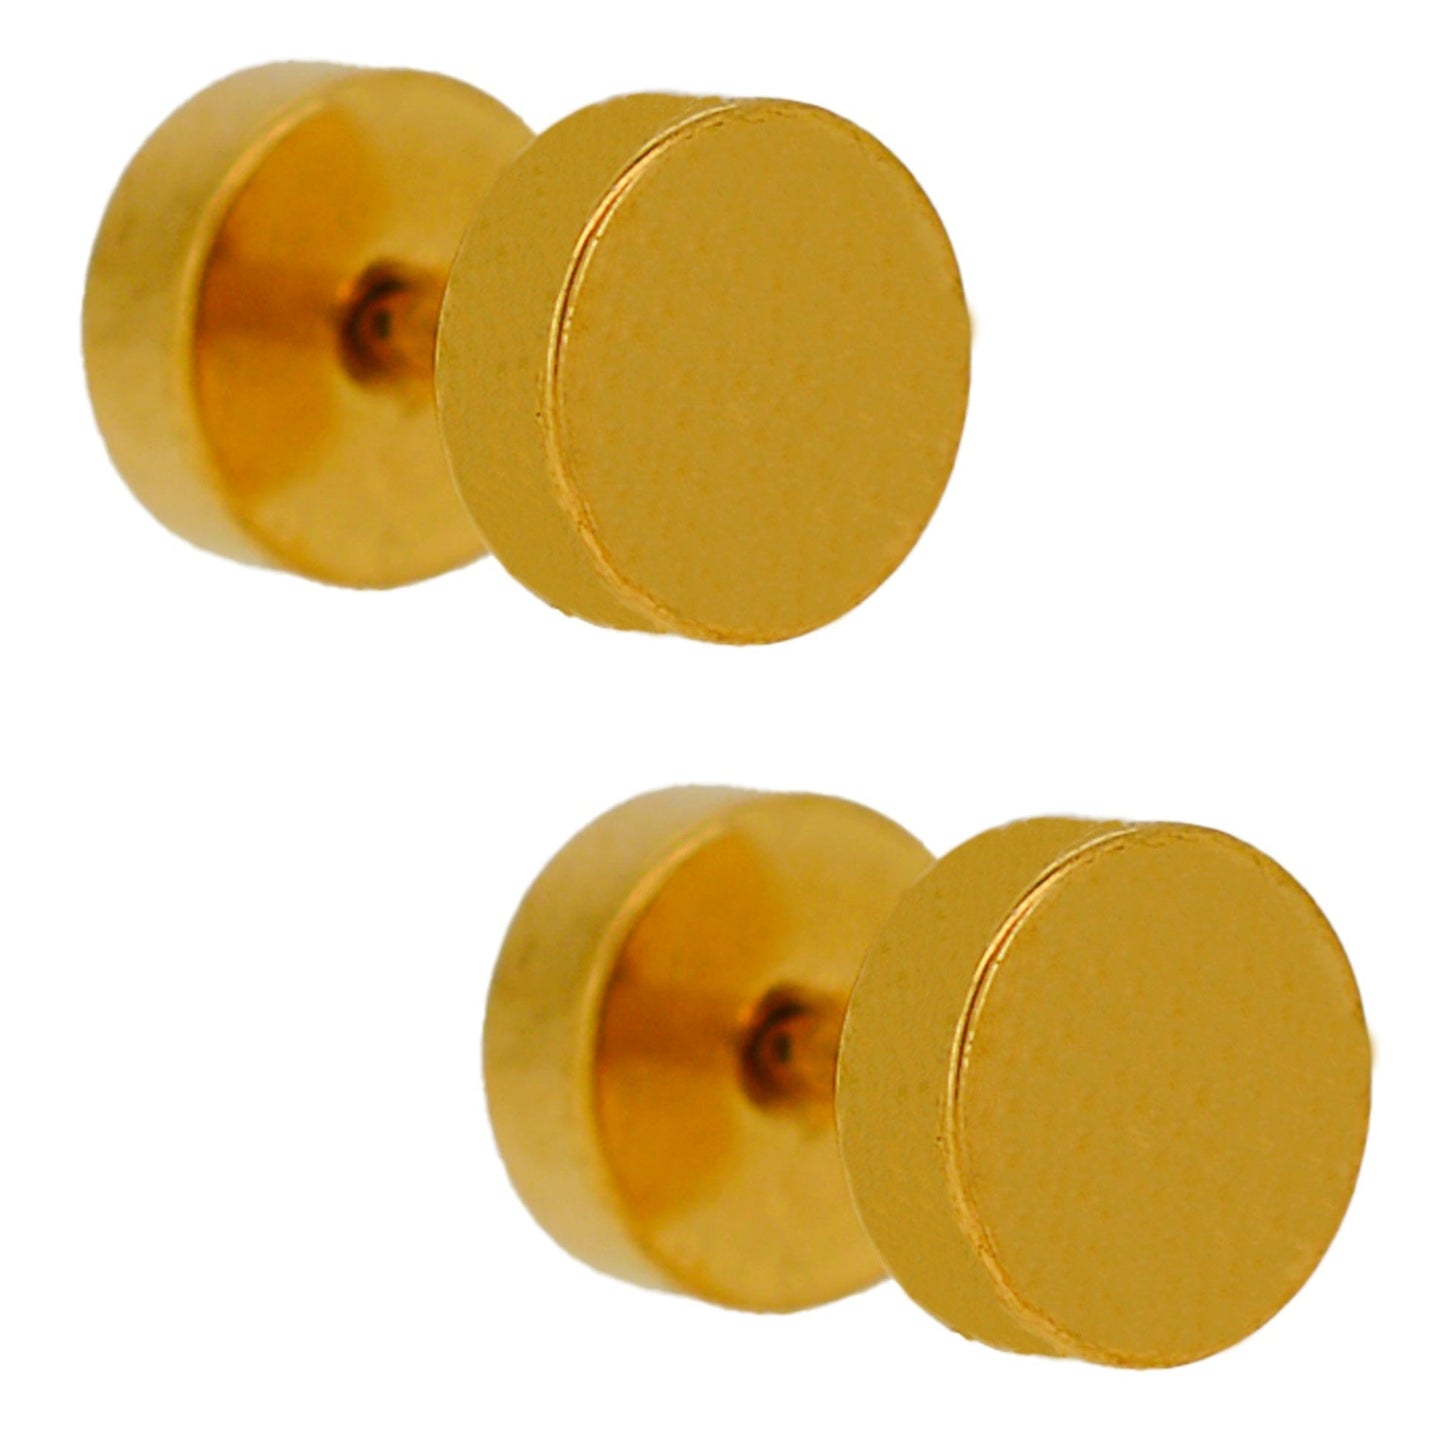 Round Disc Fake Cheater Plug Earrings - 316L Stainless Steel - Pair